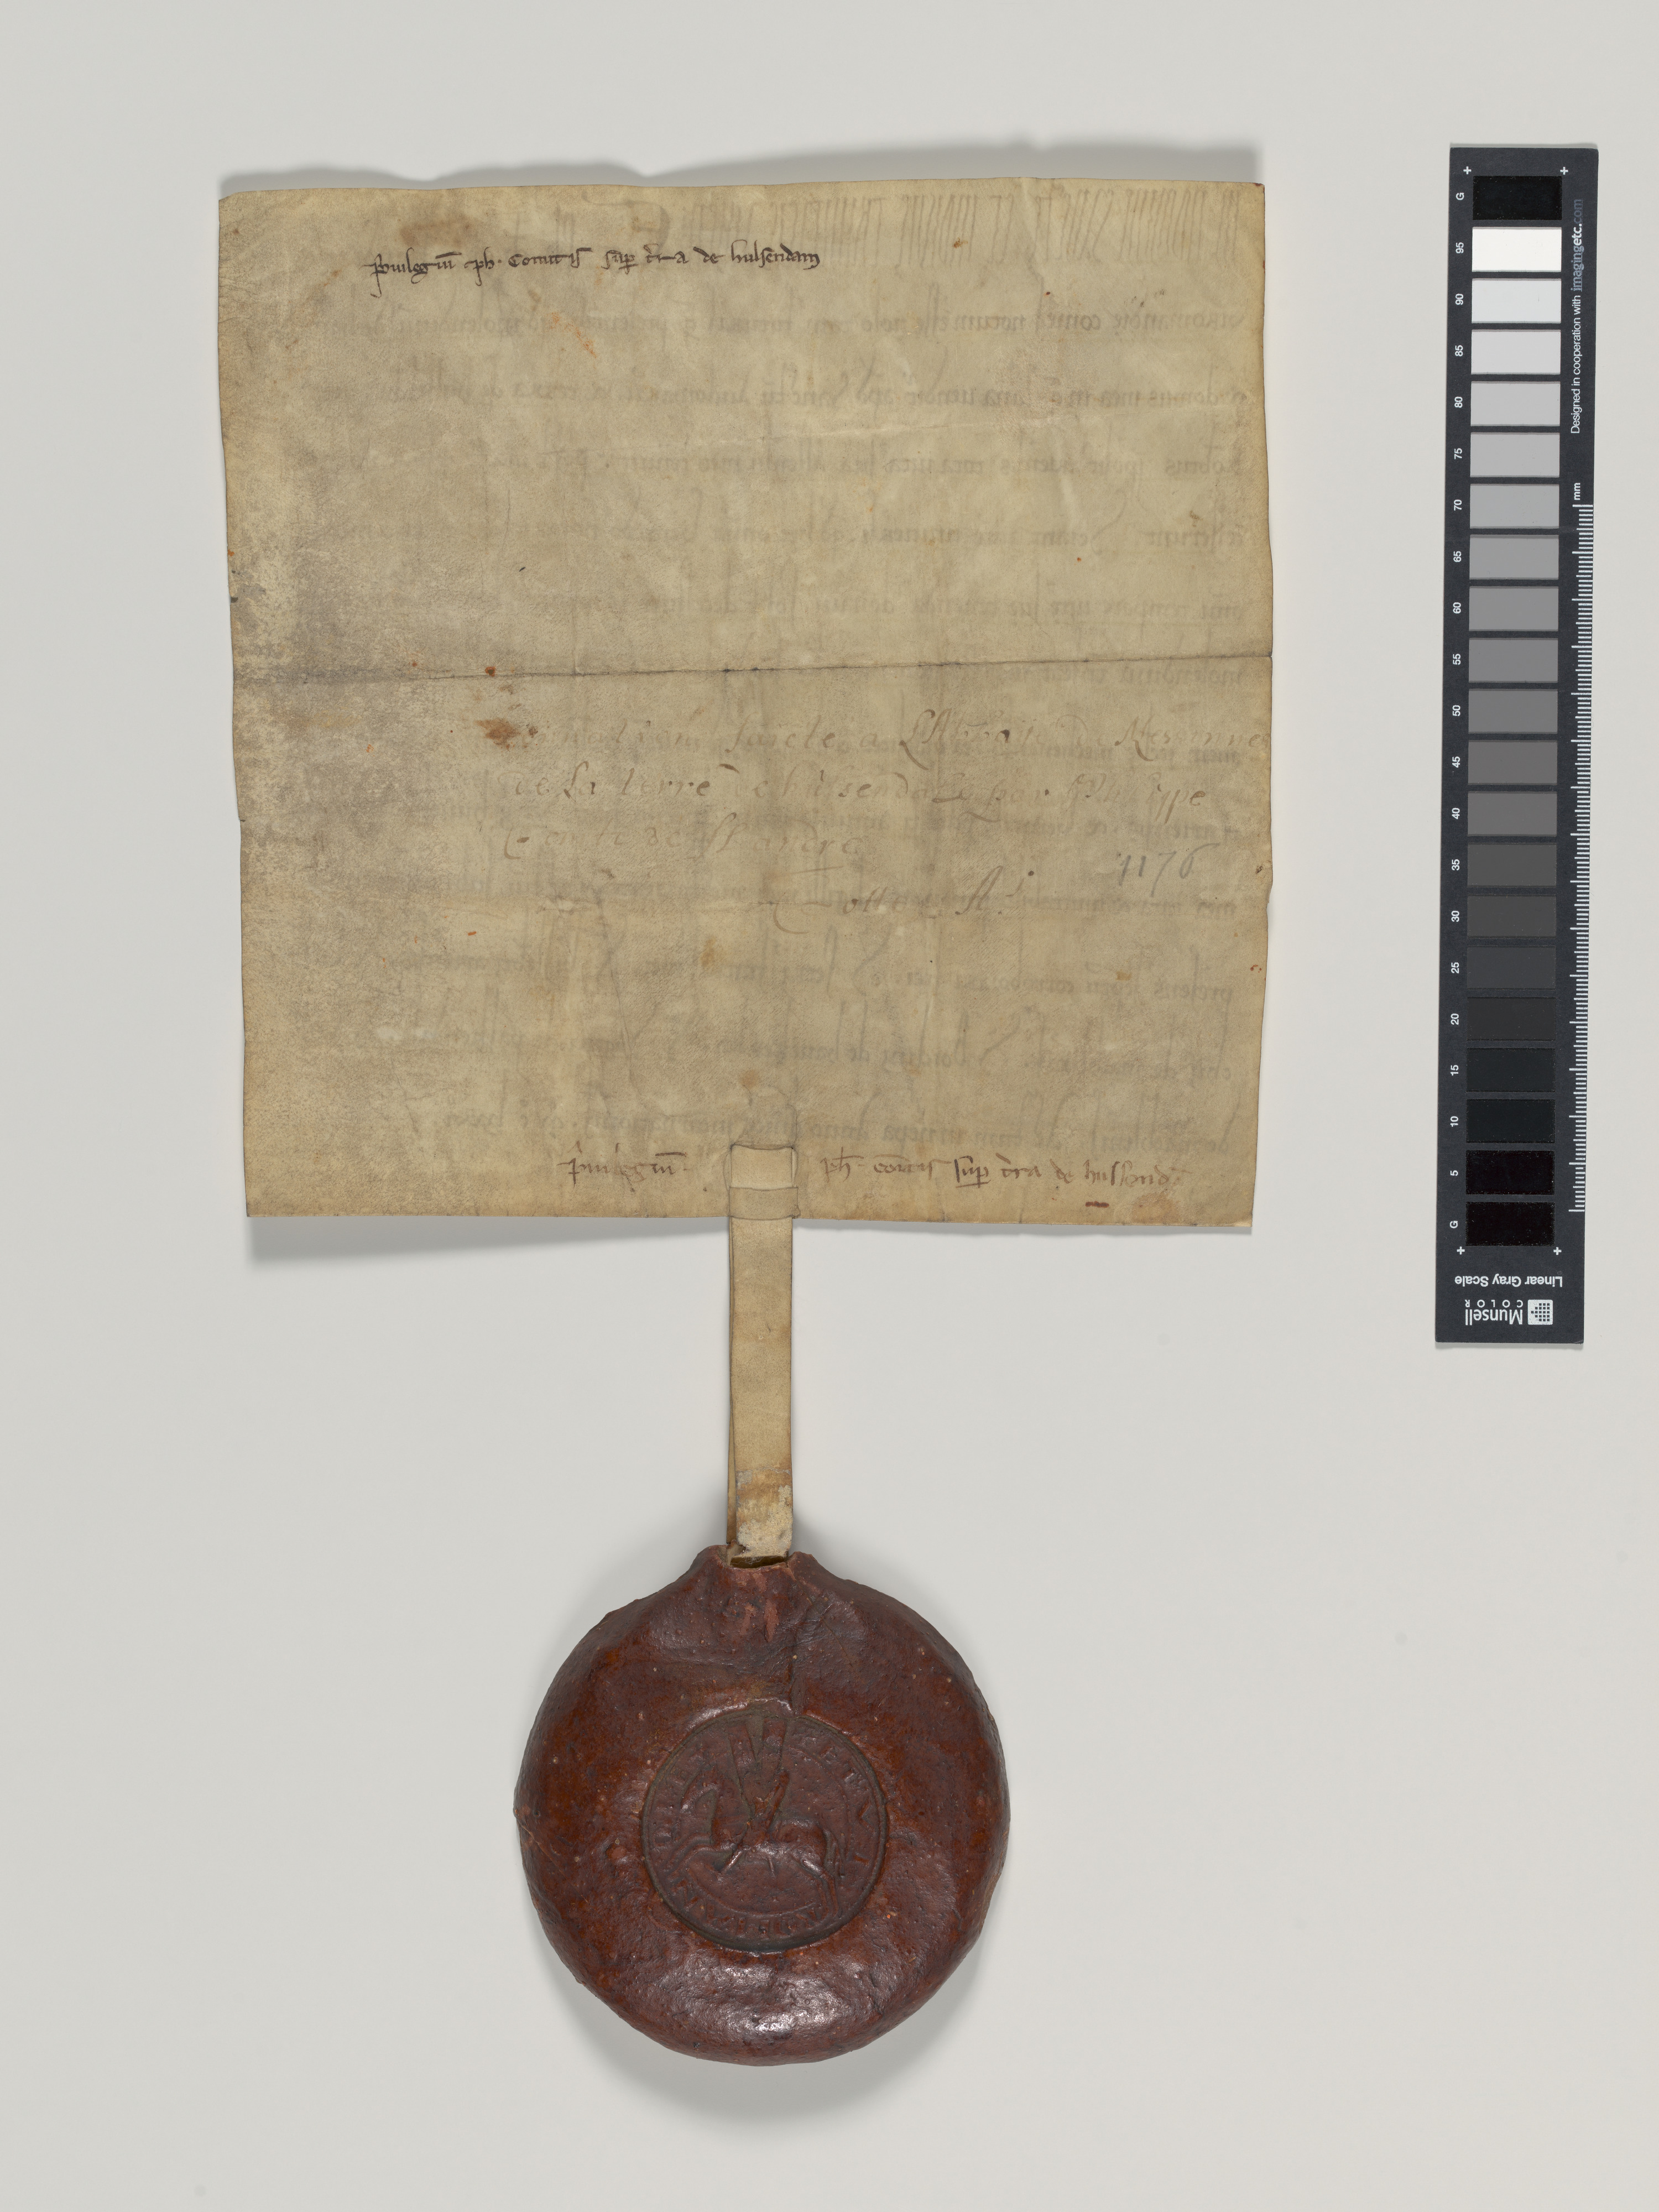 File:Parchment.00.jpg - Wikimedia Commons